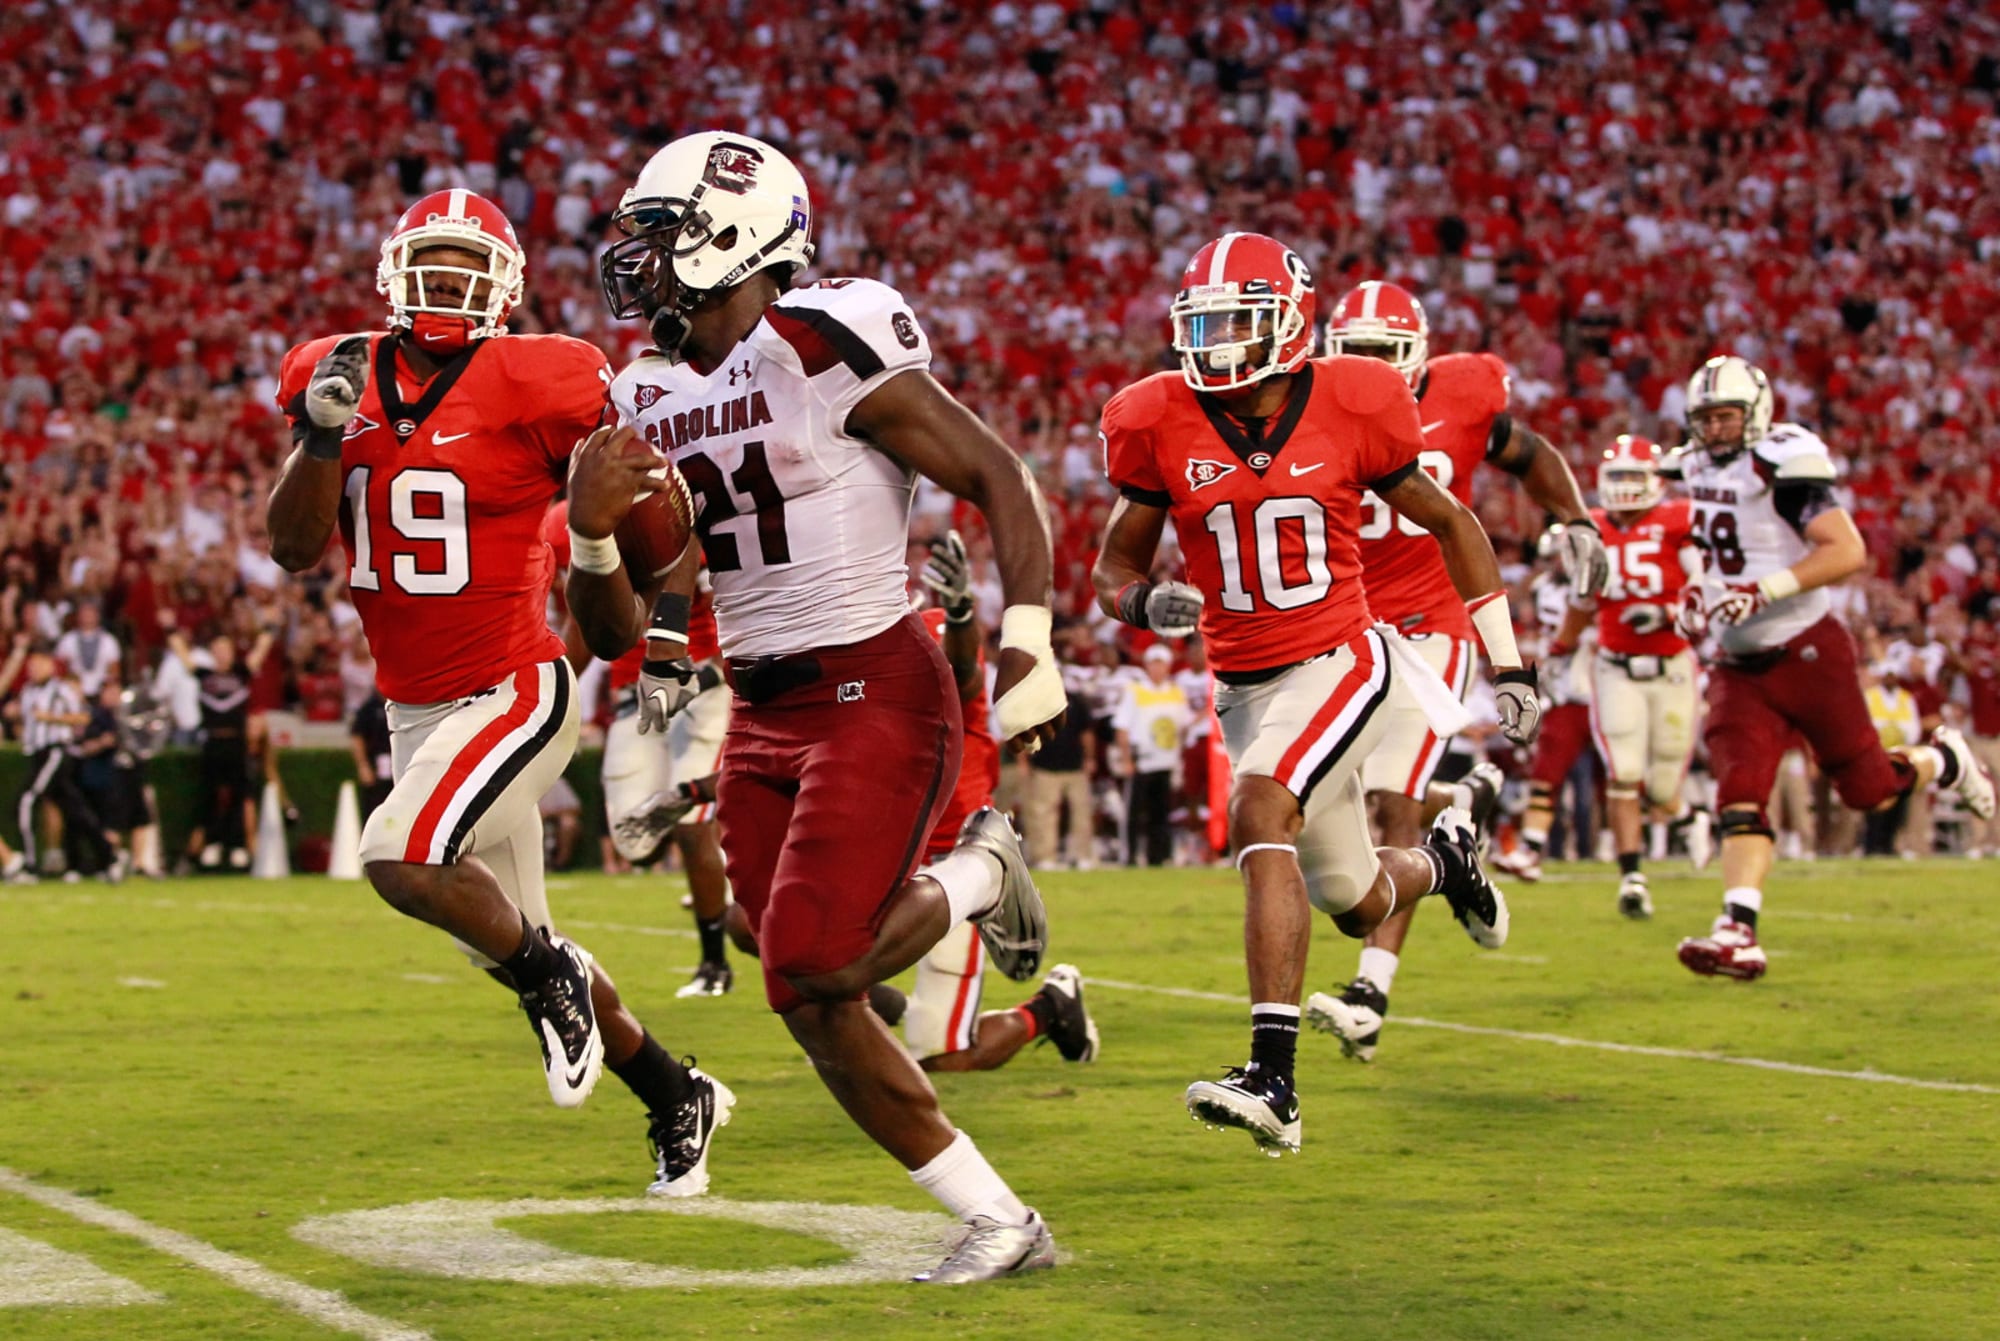 most exciting games of rivalry in Georgia